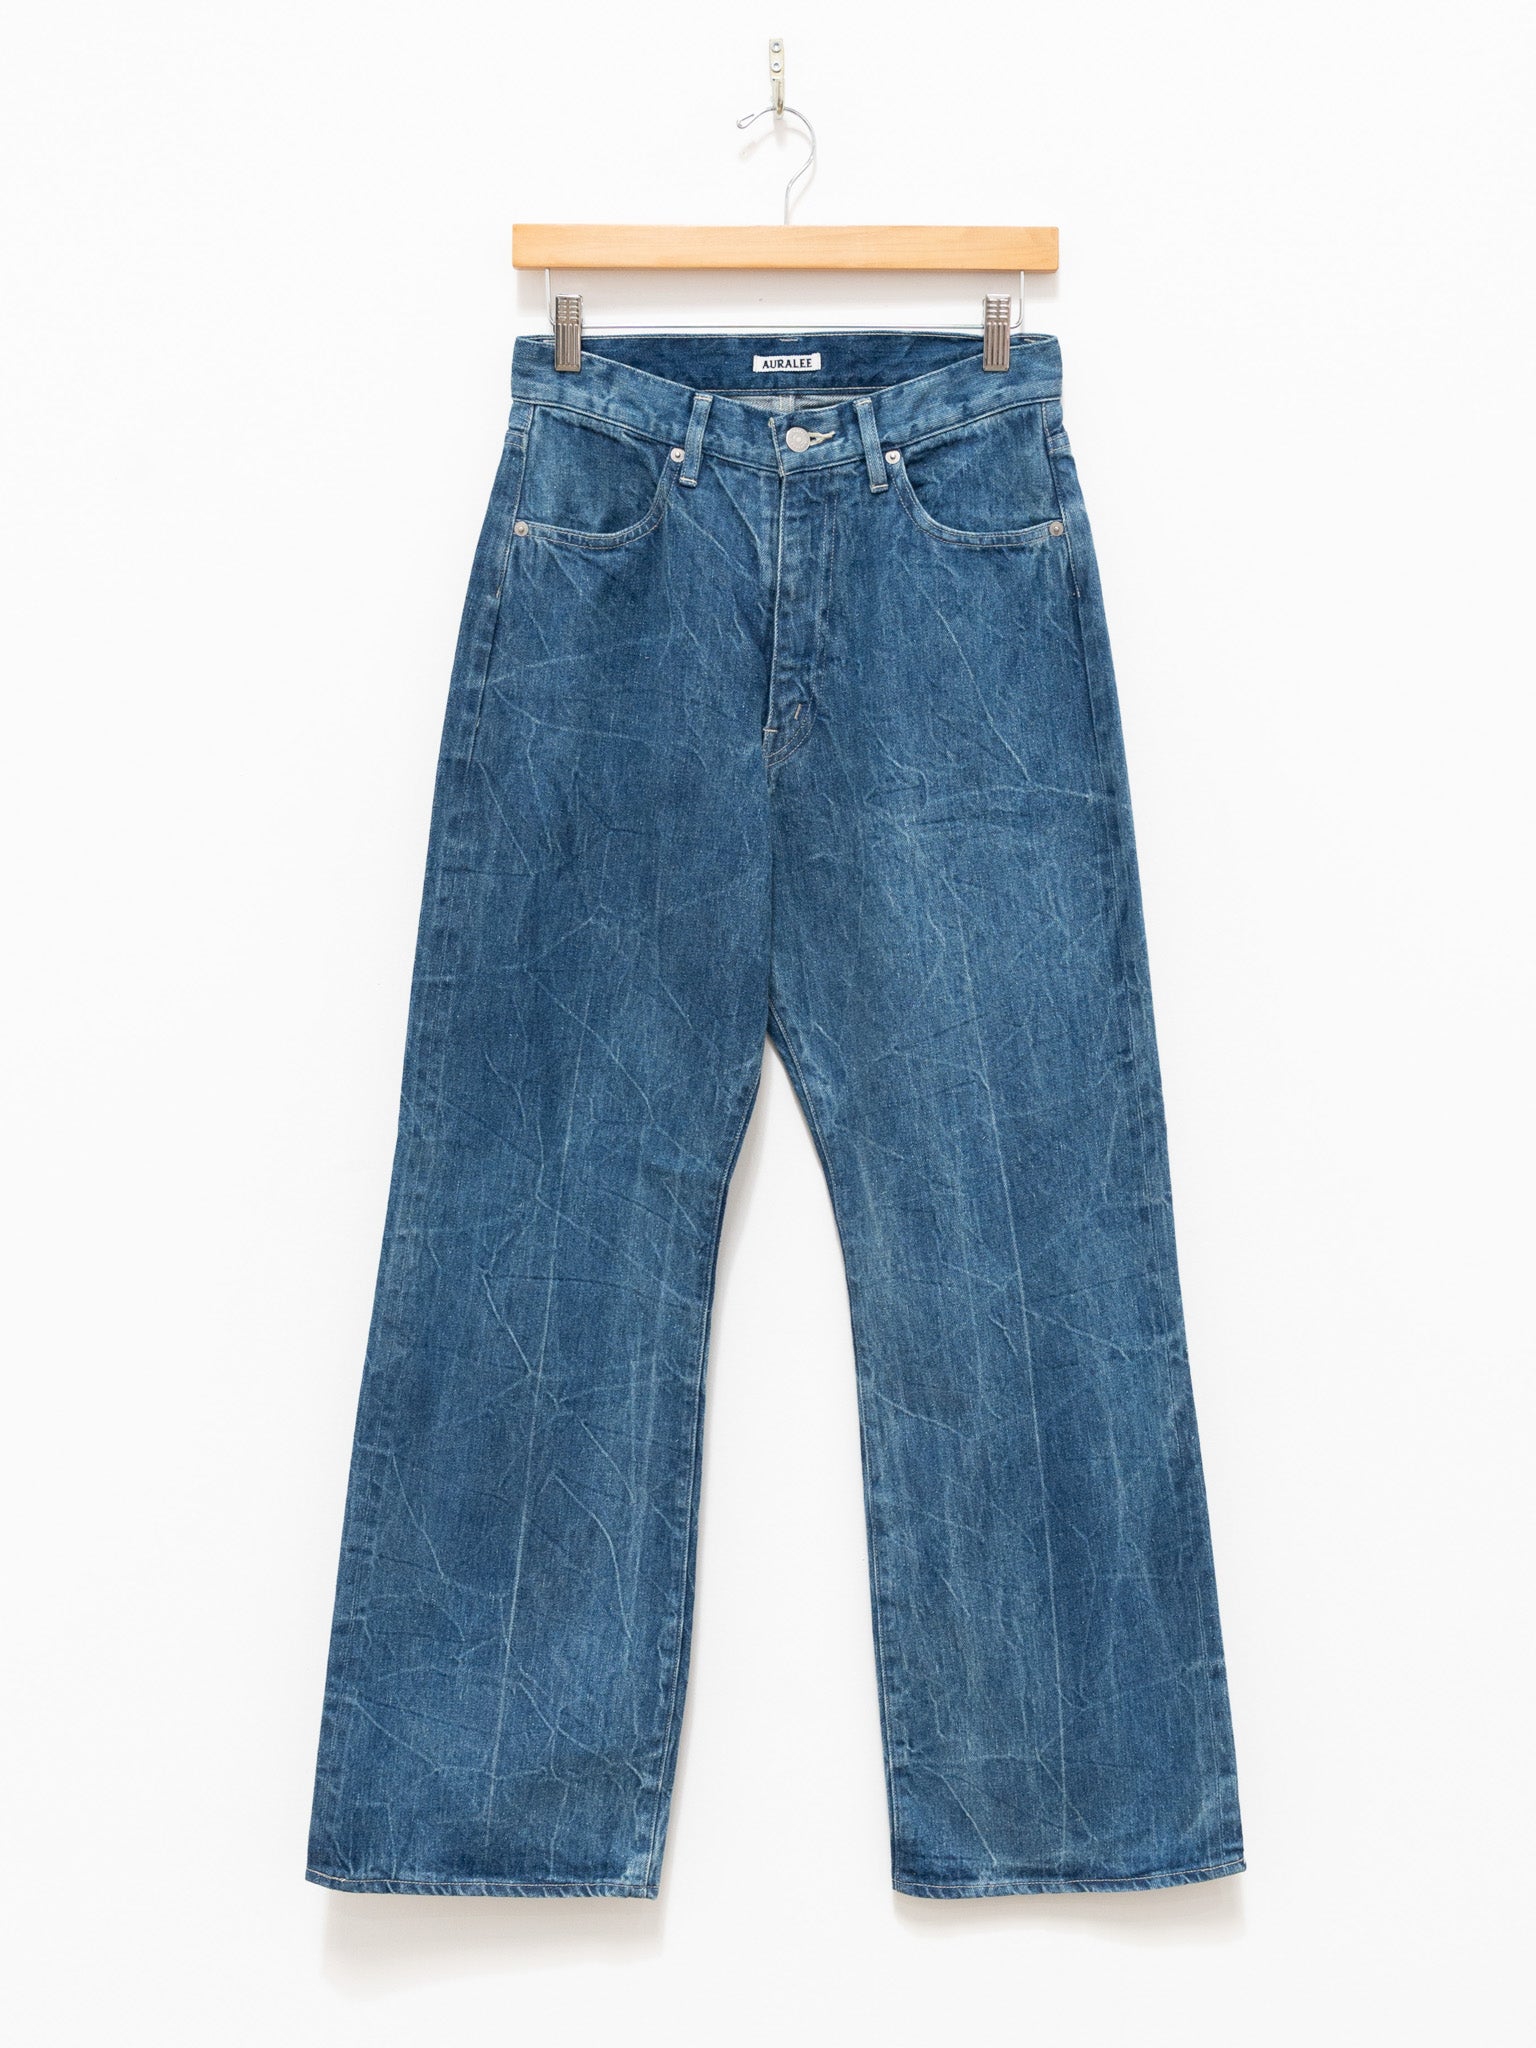 Lightweight Jeans are the Perfect Pants for Summer